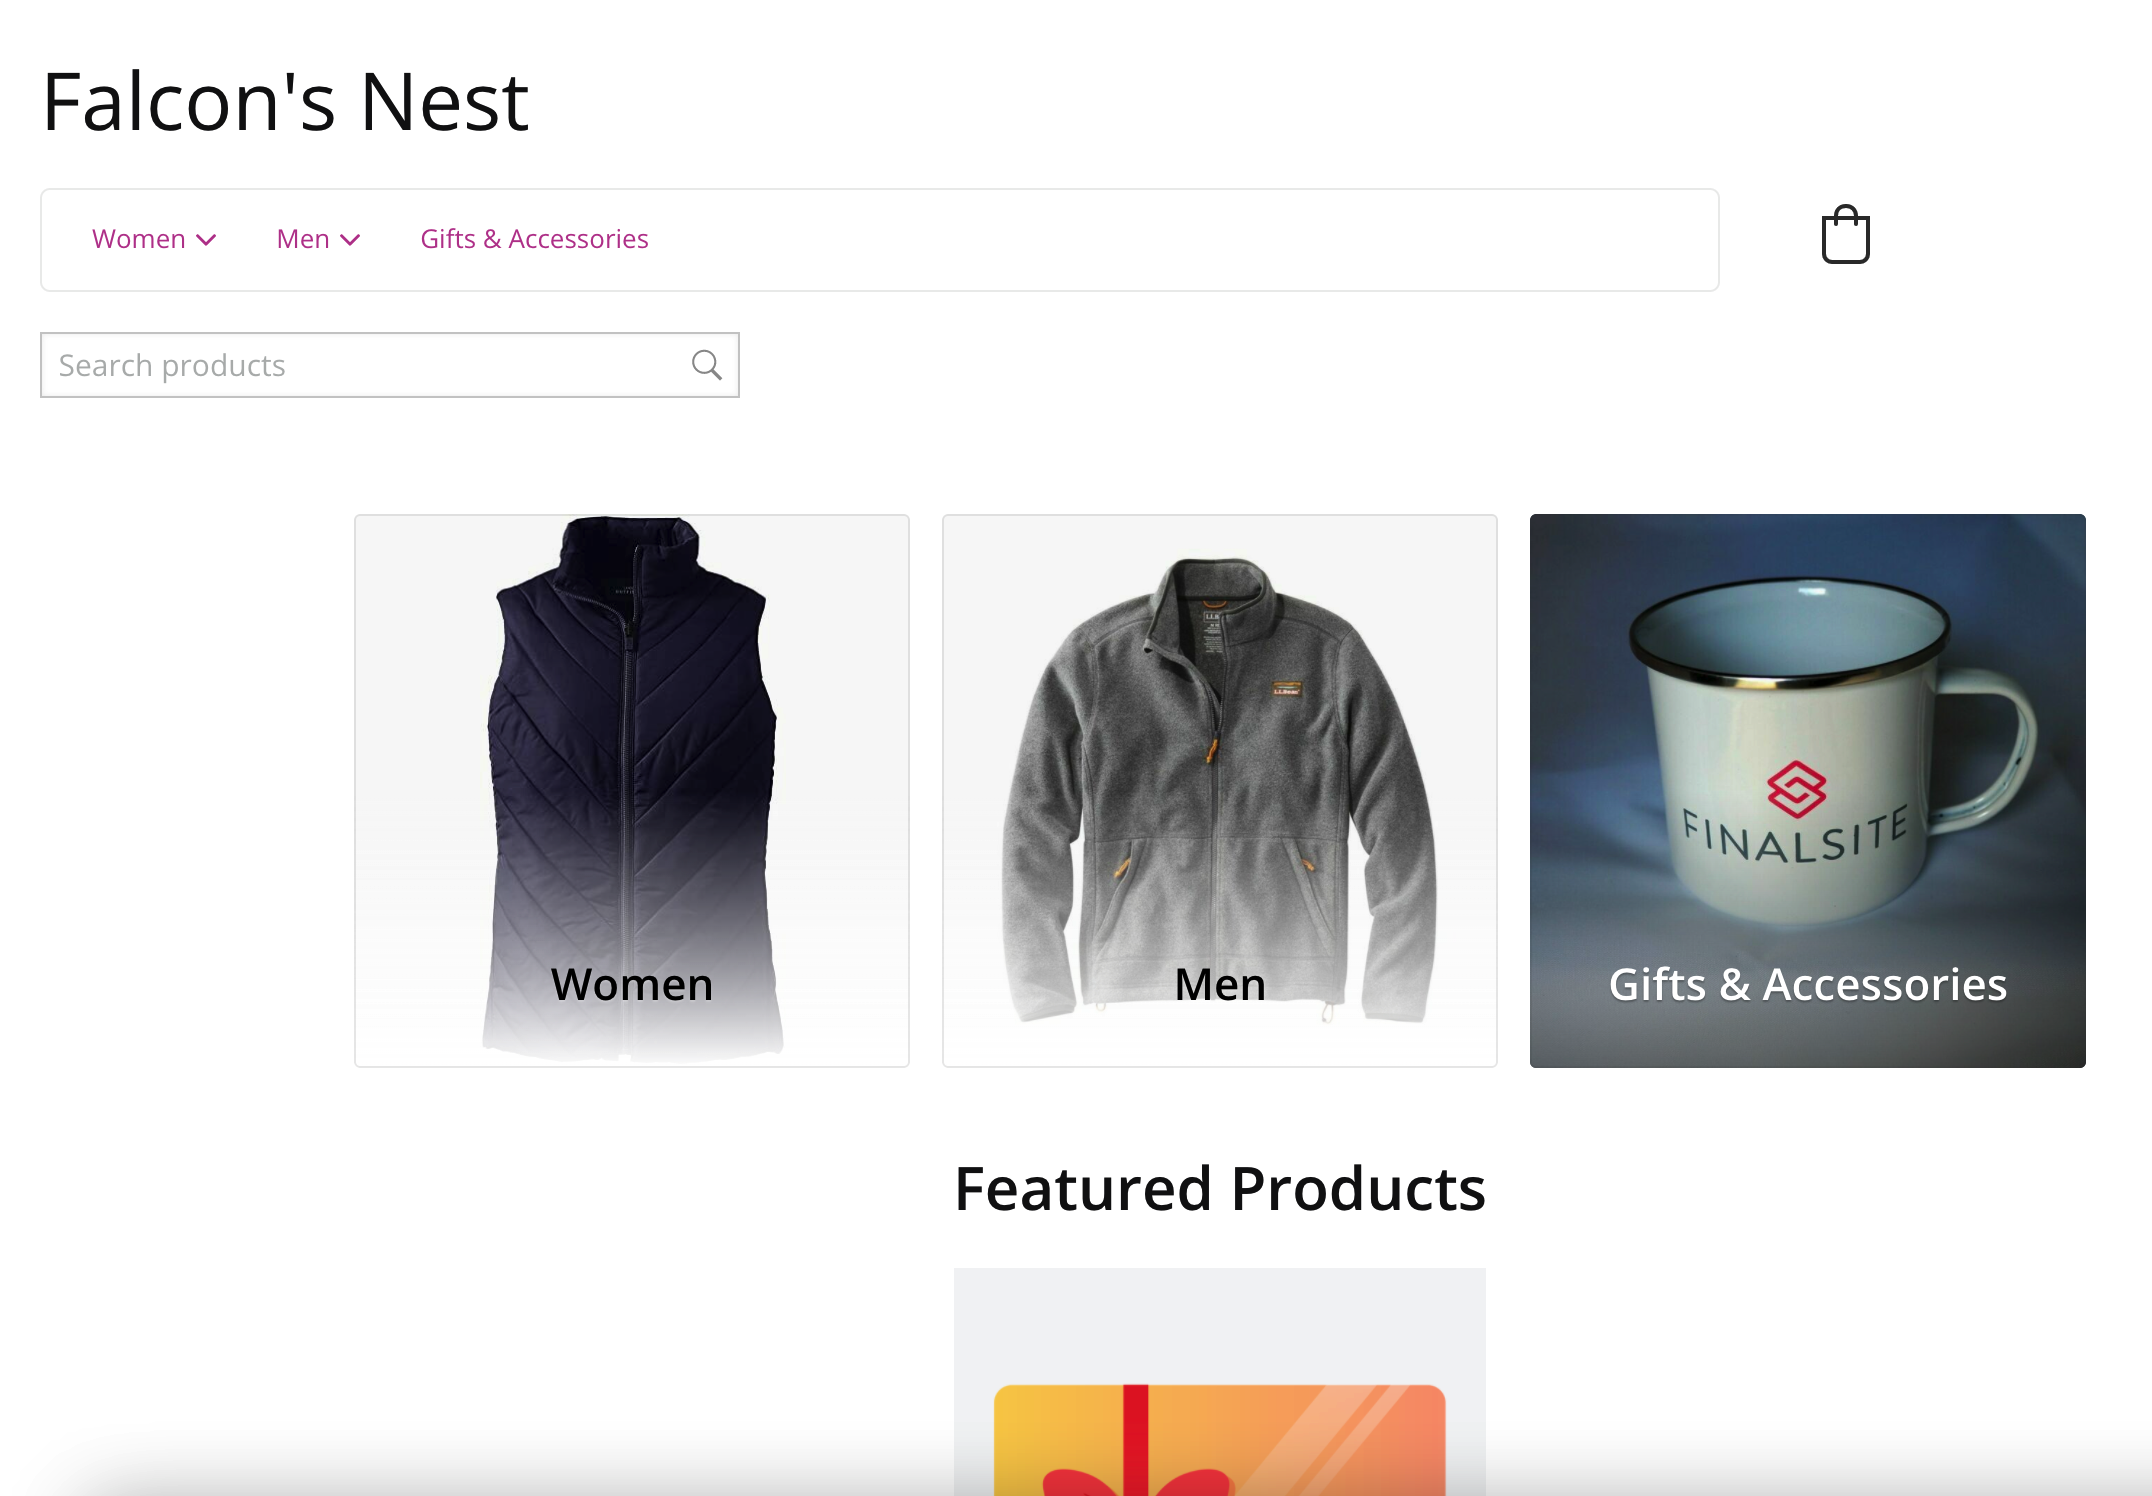 Sample store homepage showing multiple categories with images of Finalsite-branded products